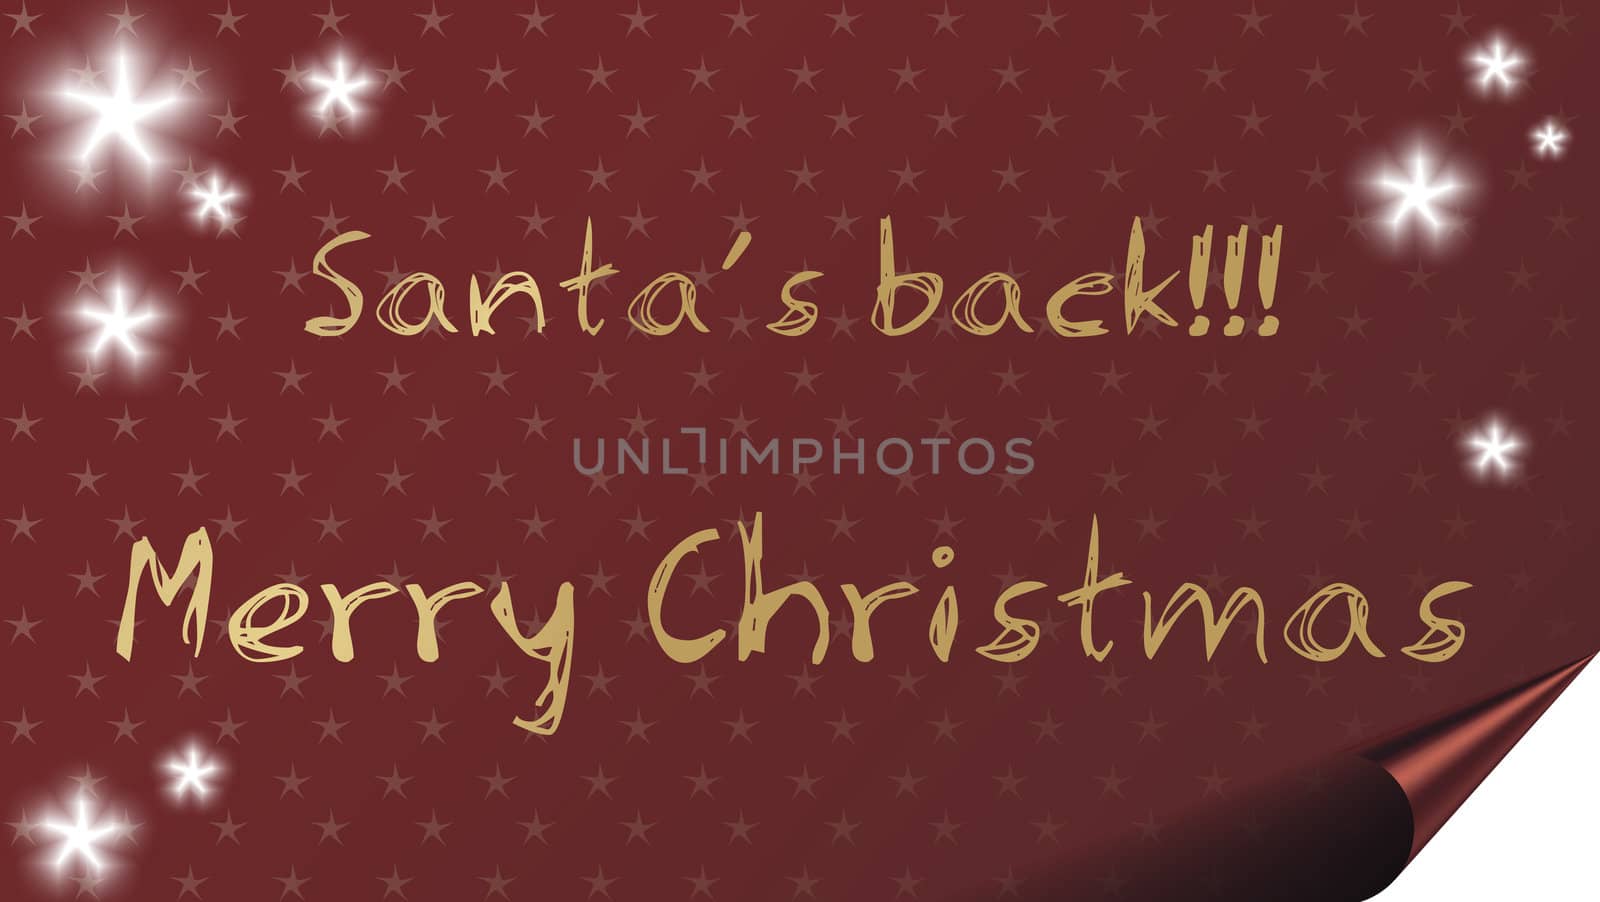 Santa's back!- Christmas card background with stars.